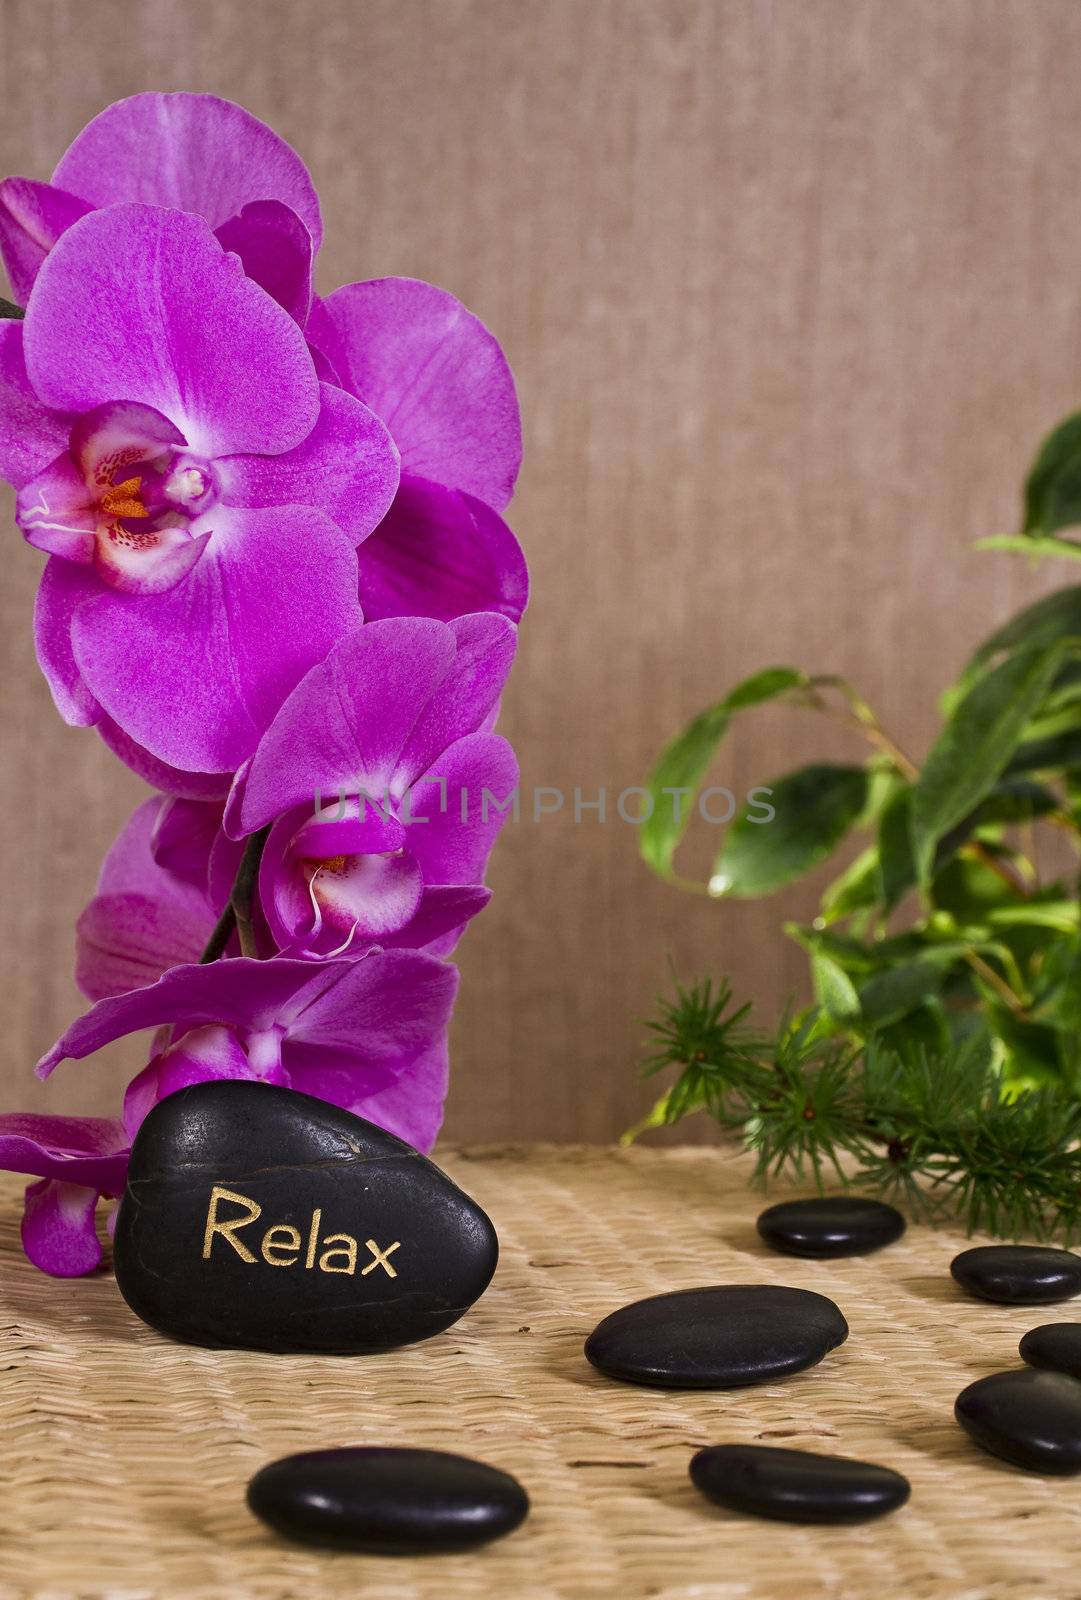 Relax Spa Concept by caldix